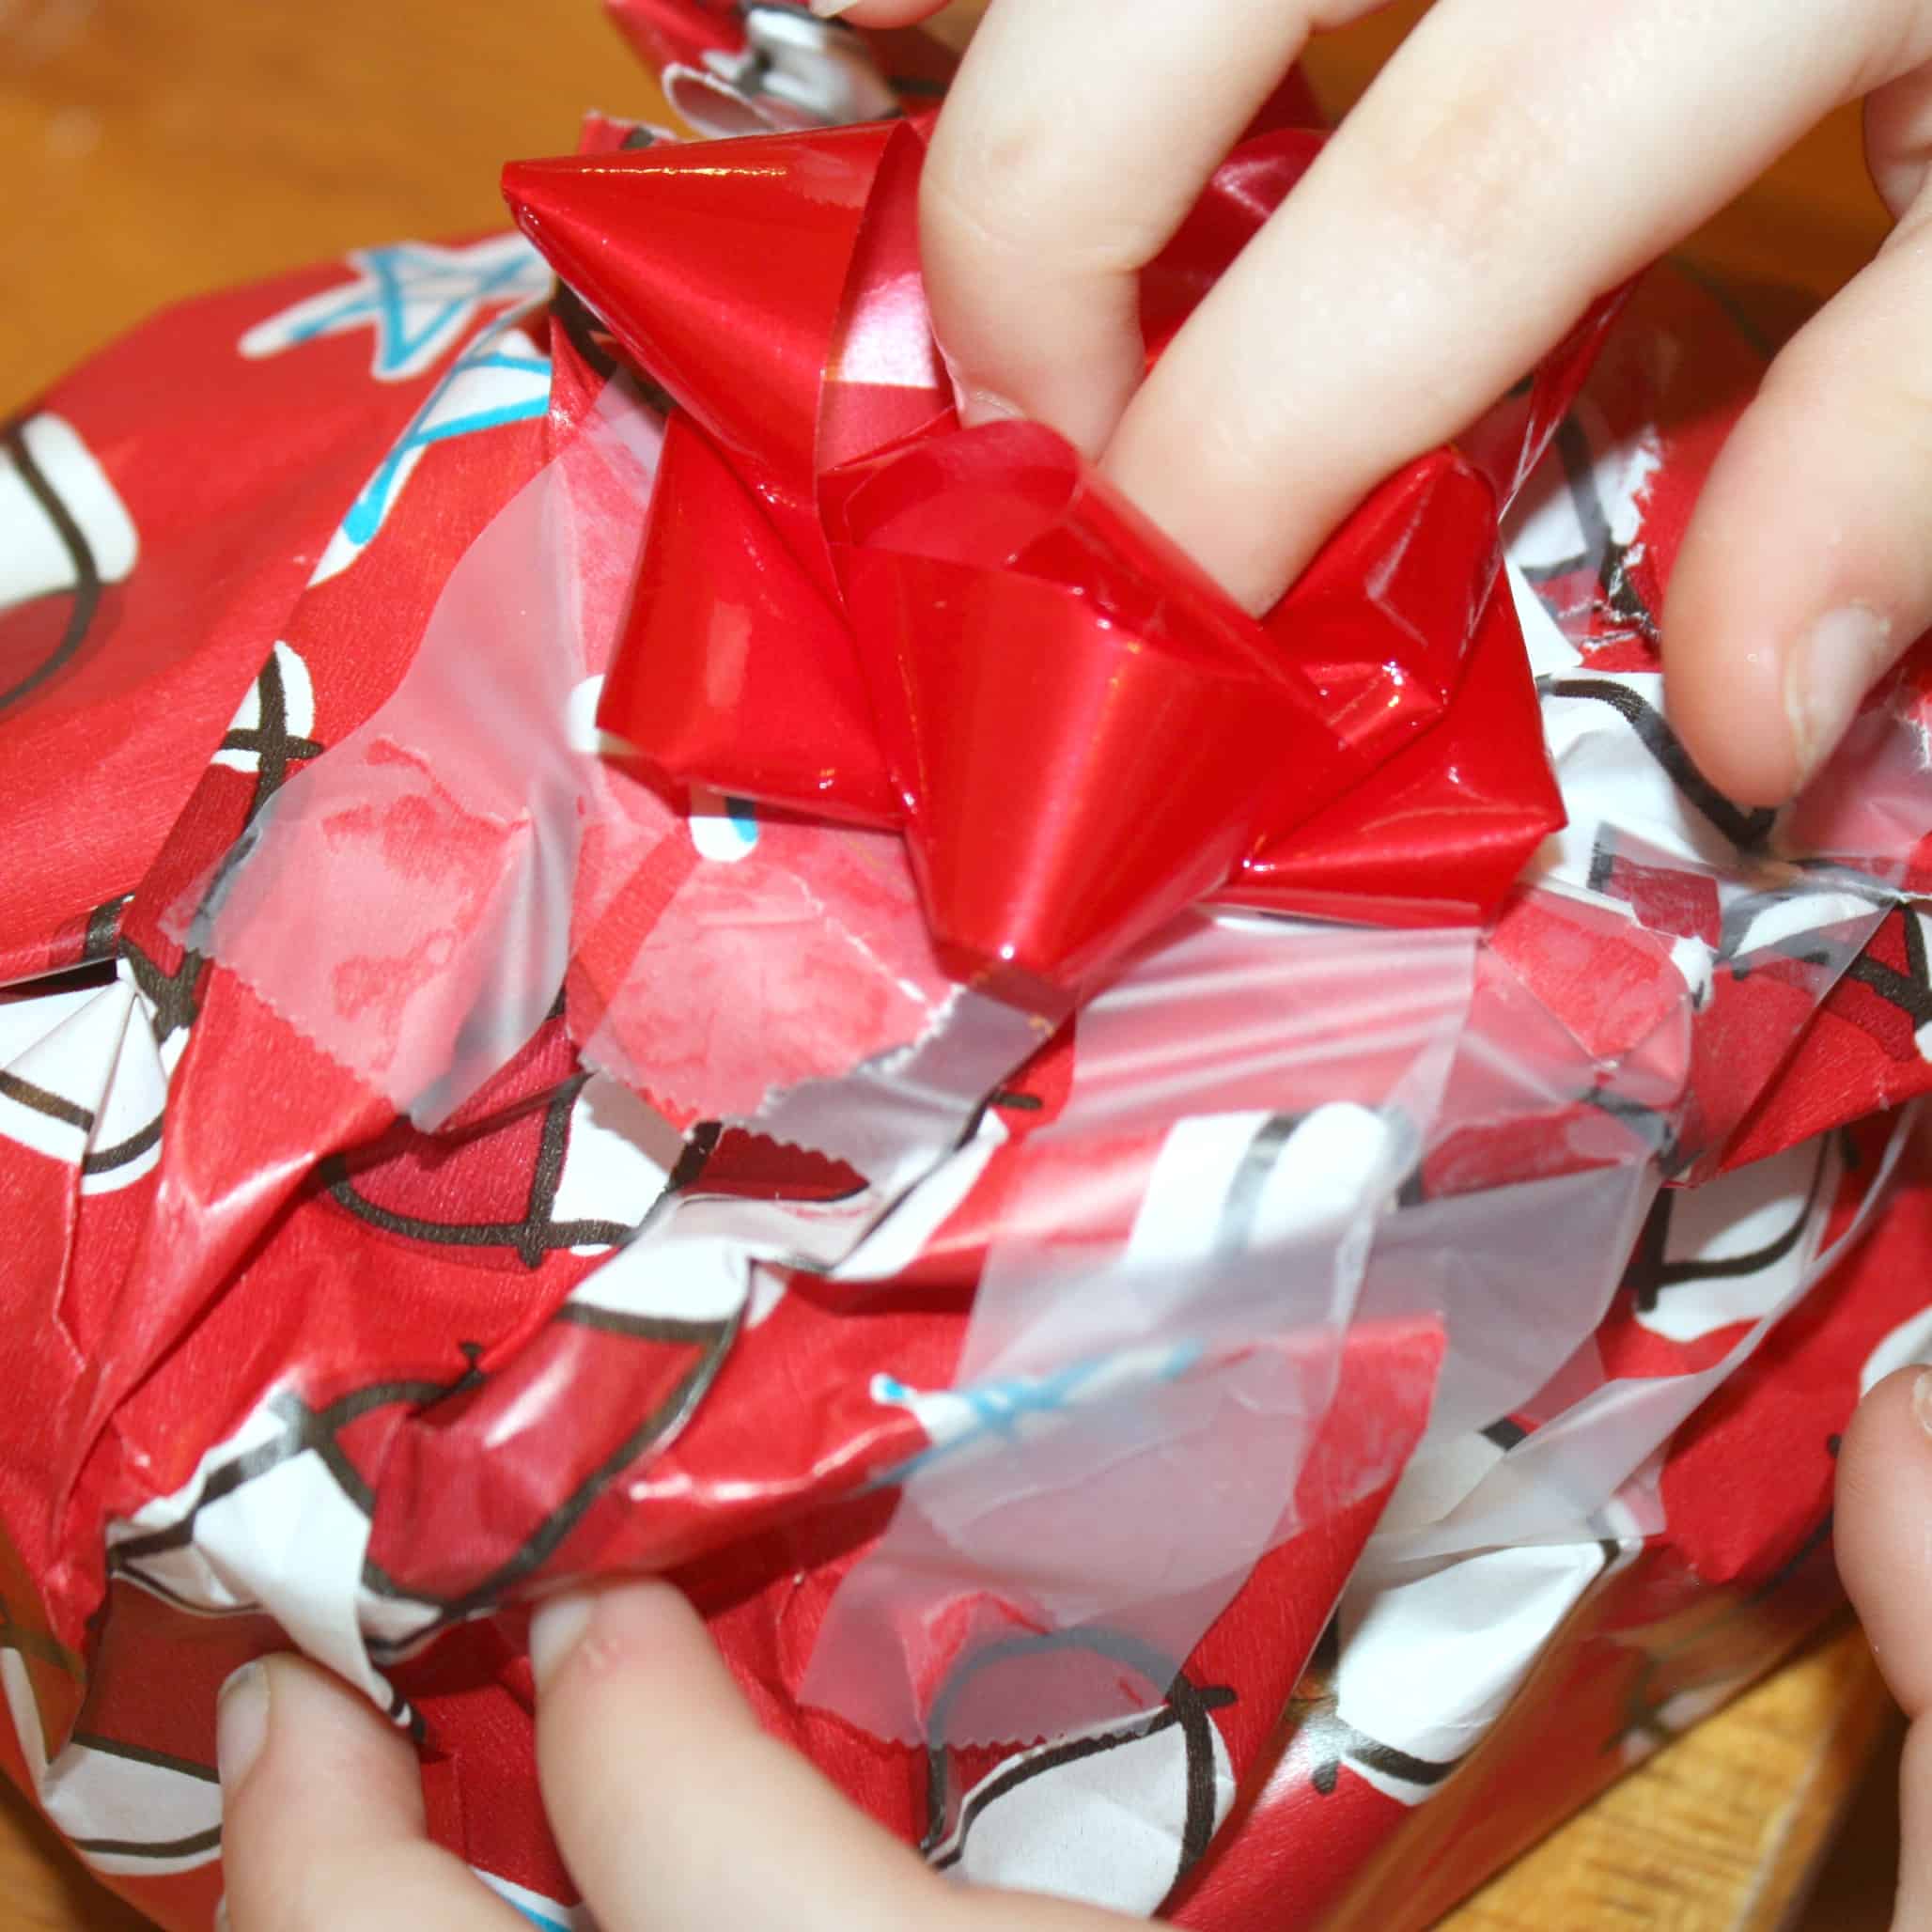 This fun gift wrapping pretend play activity is perfect for a seasonal project for toddlers through elementary aged children! Great for fine motor practice. 